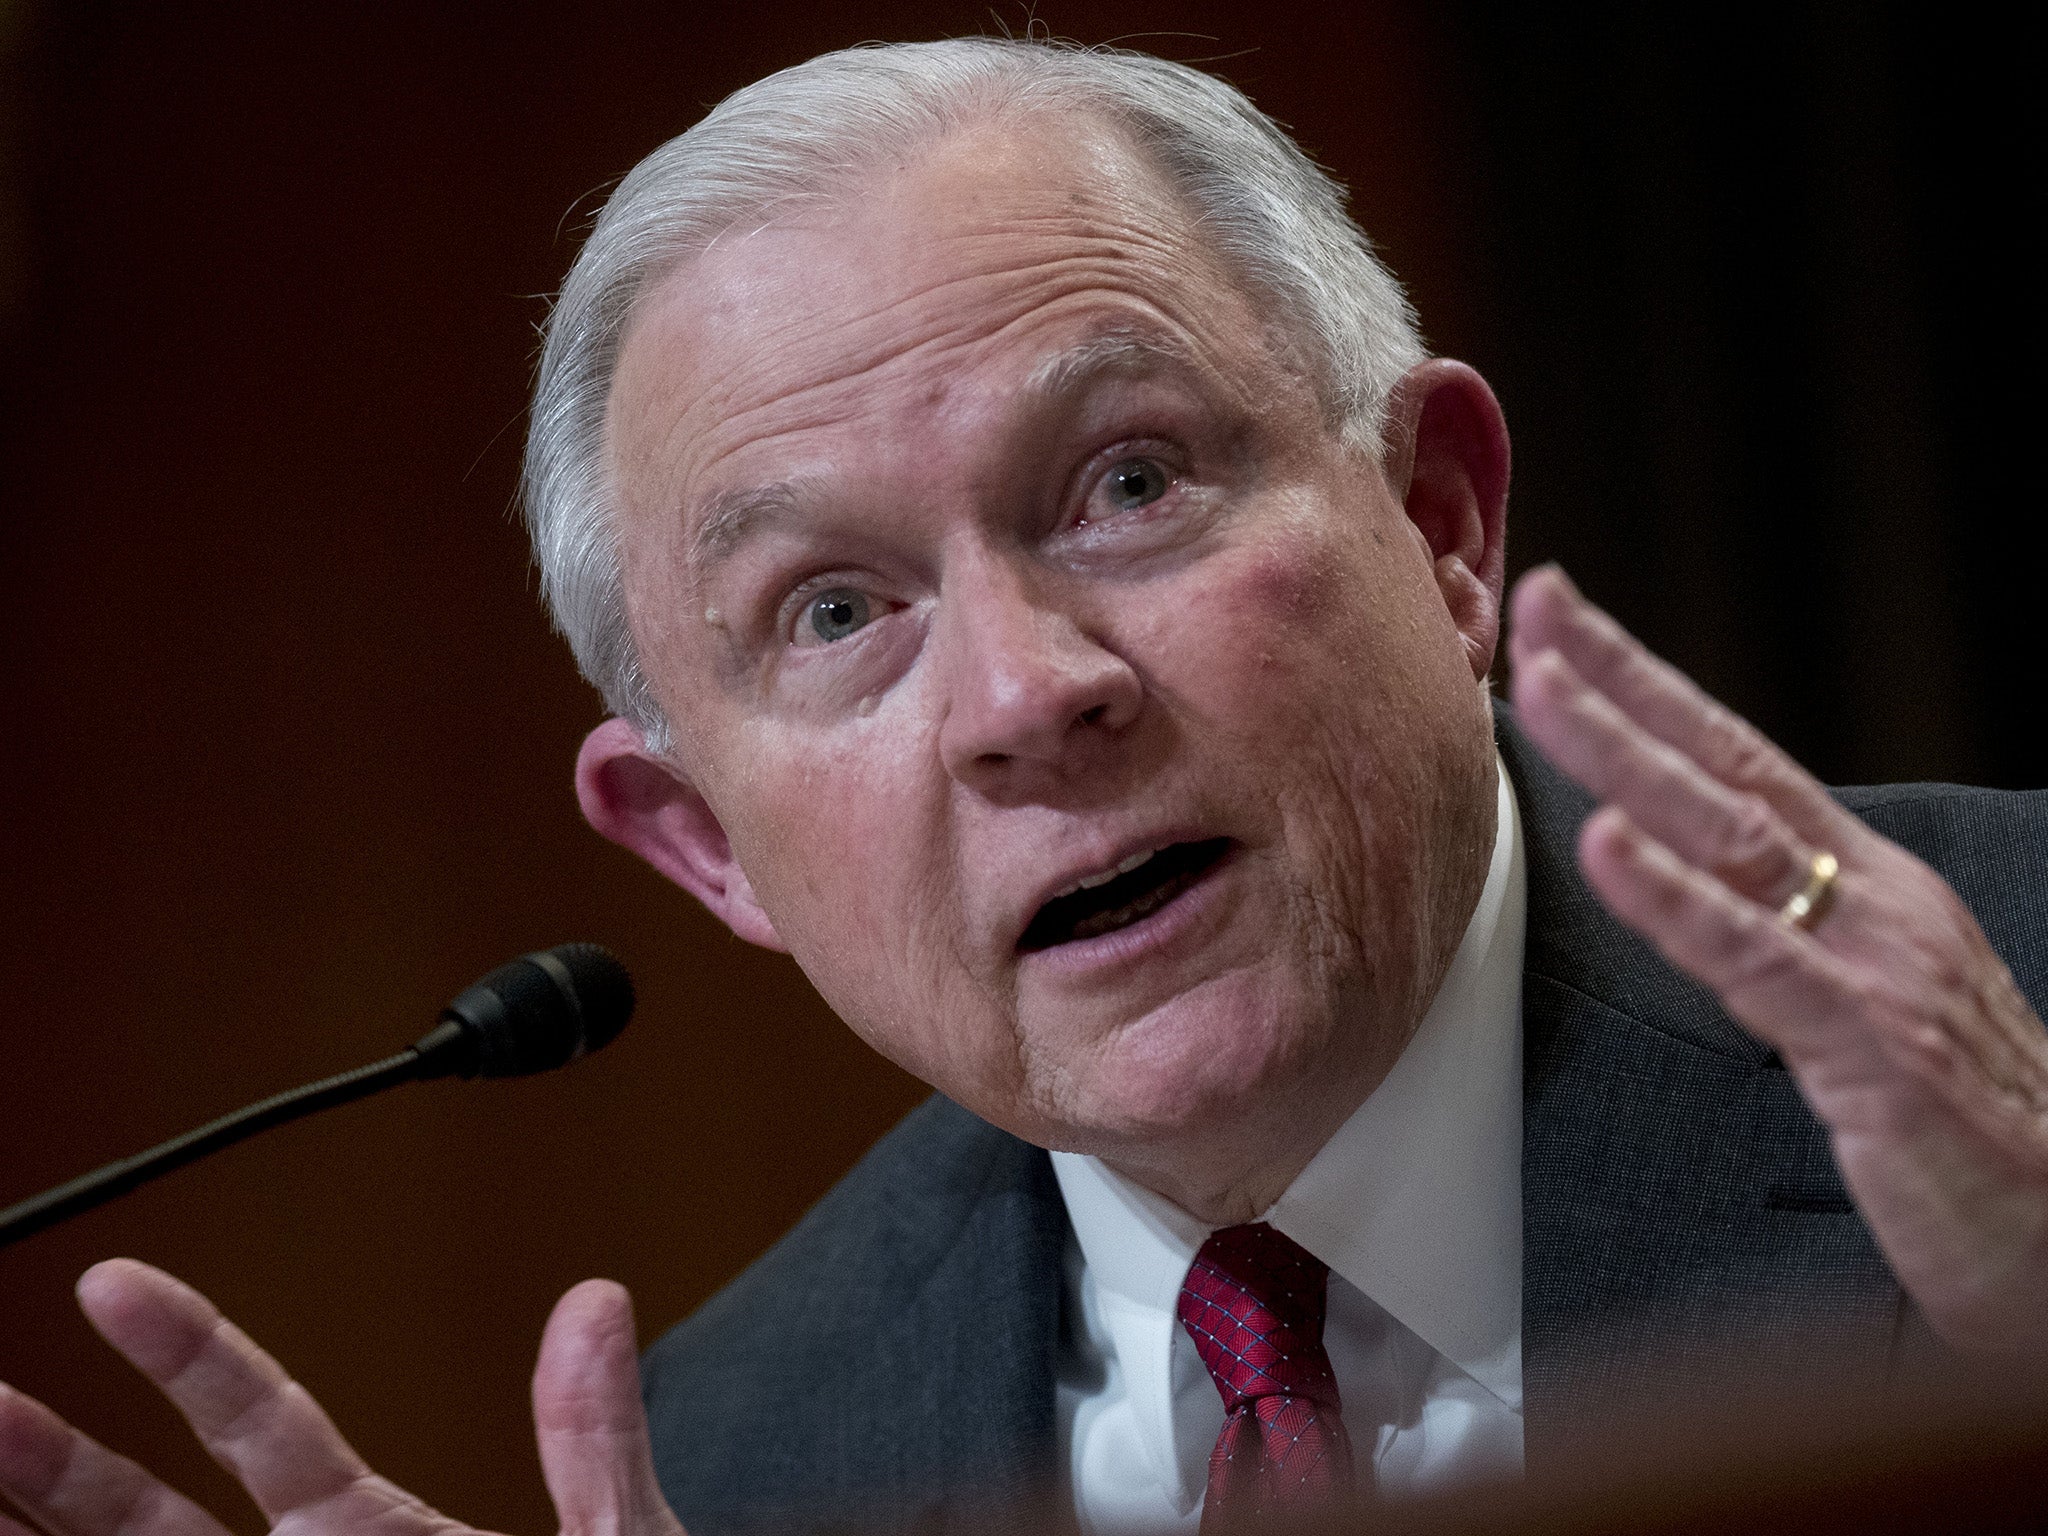 In June, Mr Sessions vacated a 2016 Board of Immigration Appeals court case that granted asylum to an abused woman from El Salvador